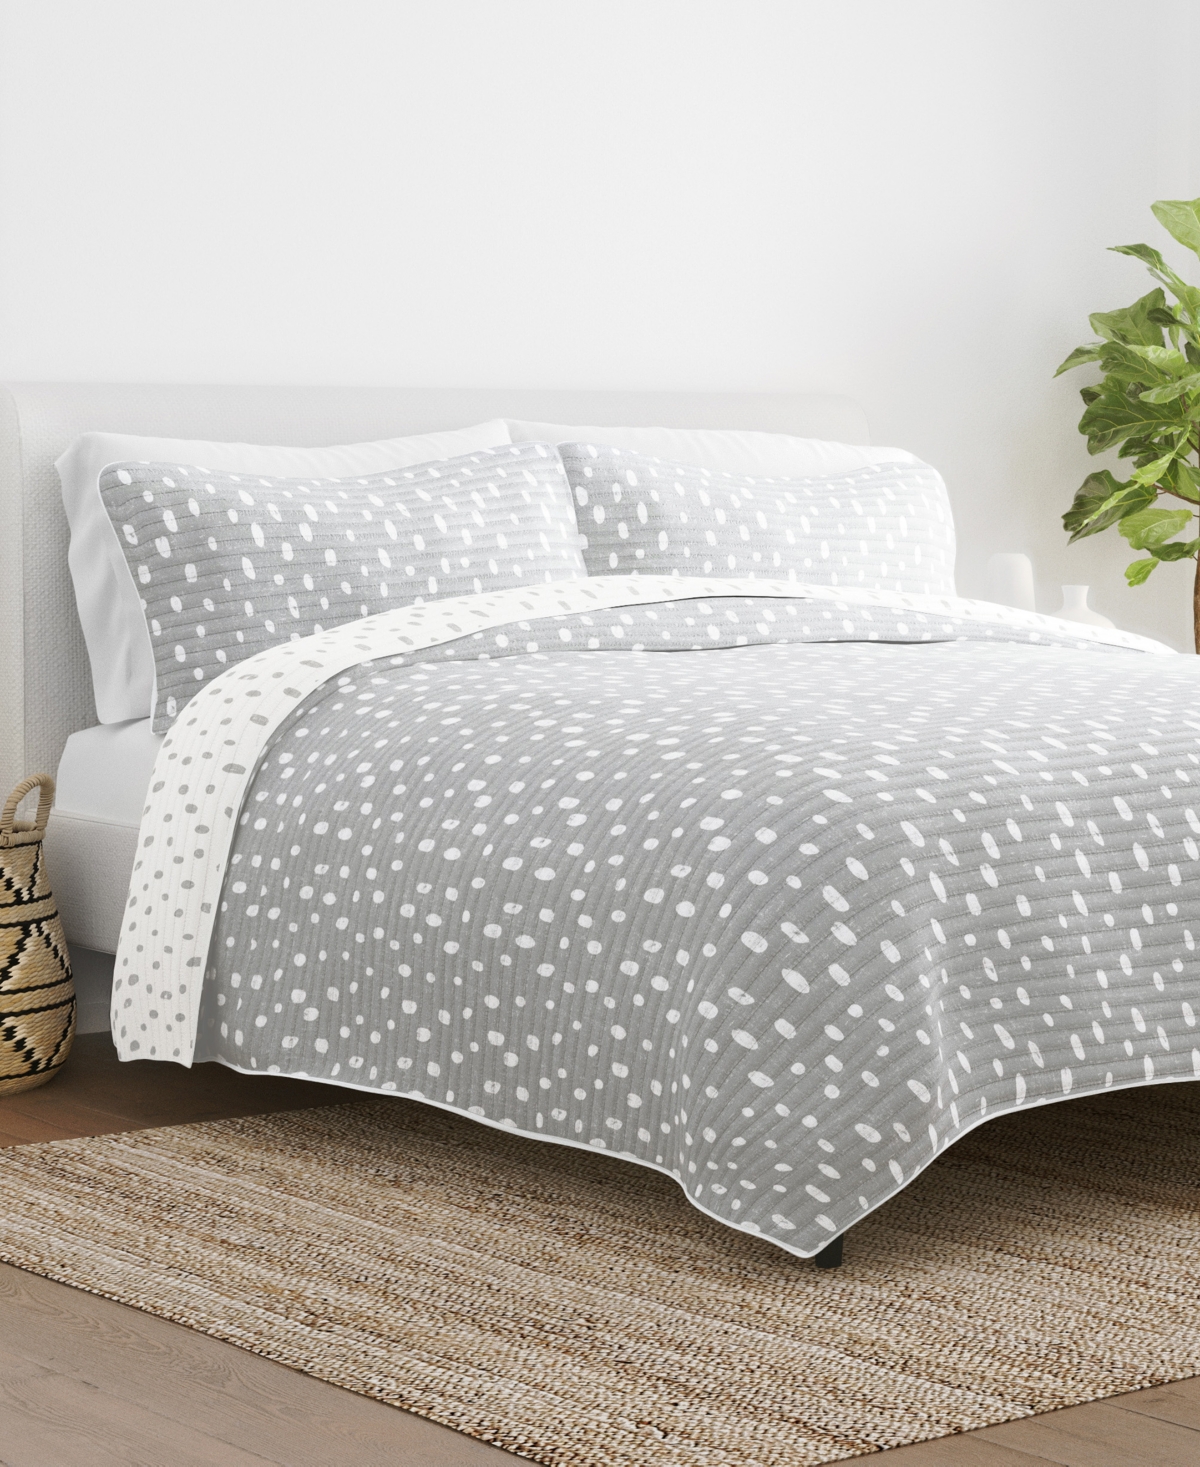 Ienjoy Home All Season 3 Piece Painted Dots Reversible Quilt Set, Full/queen In Light Gray